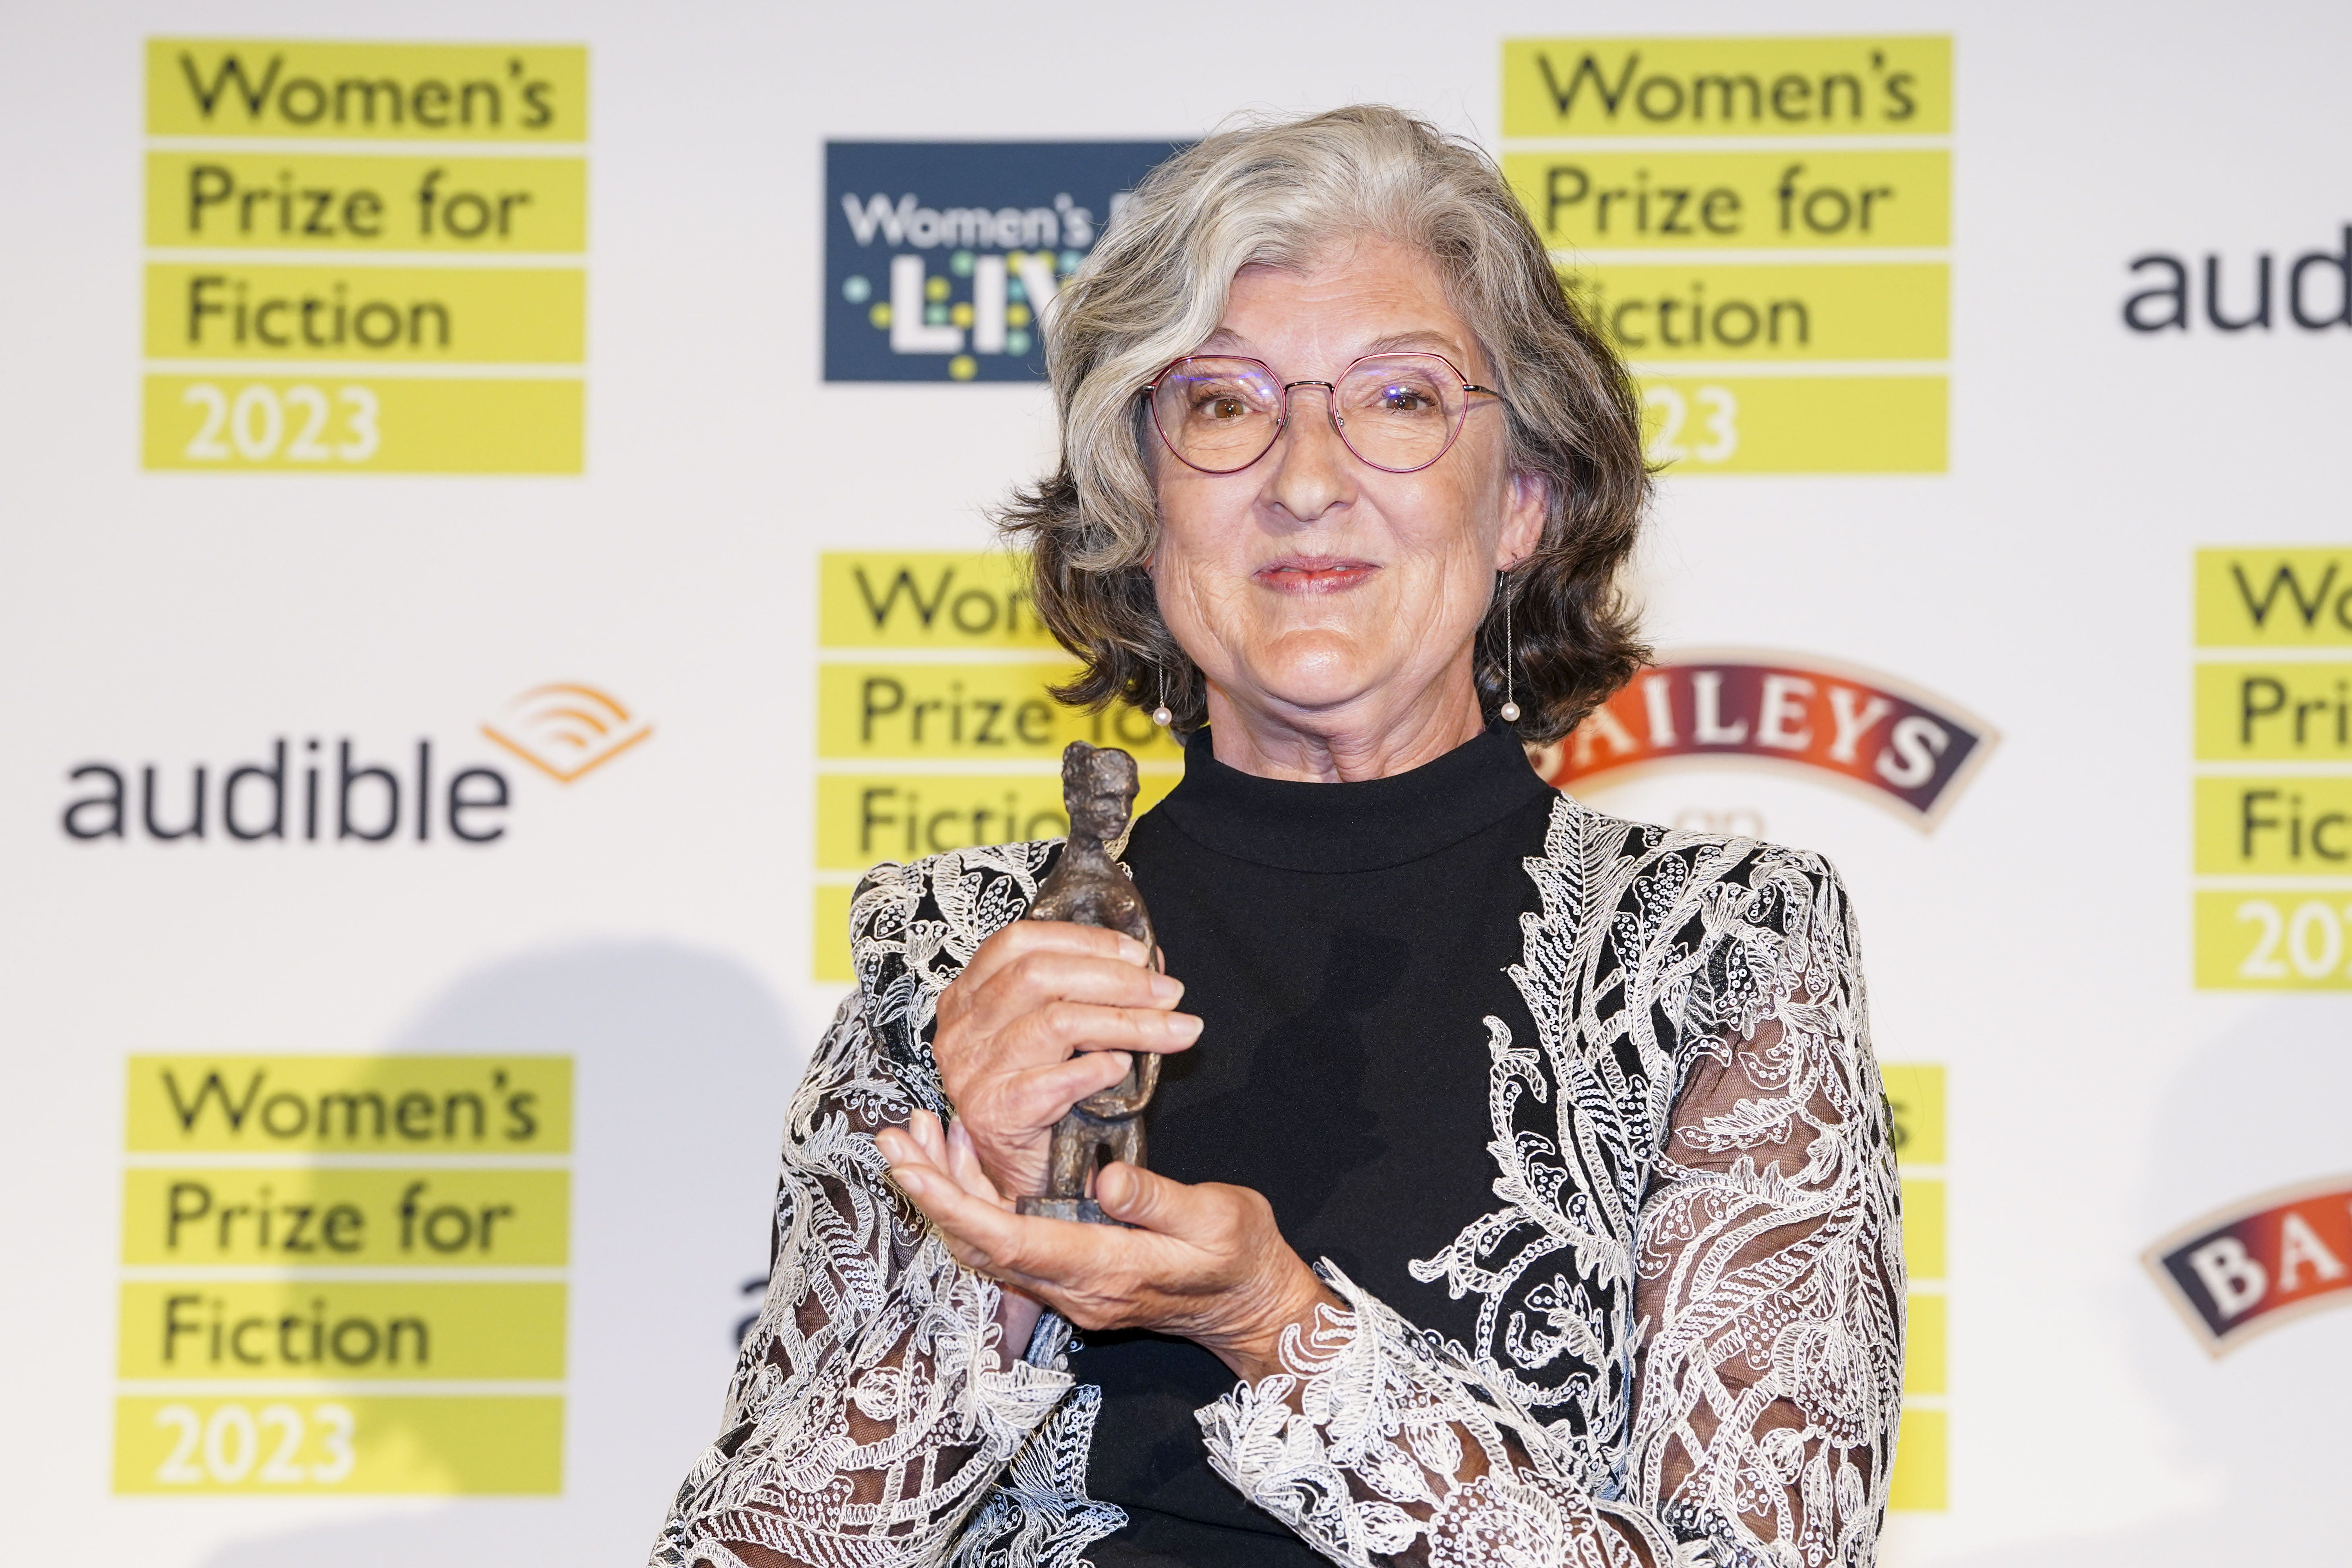 Barbara Kingsolver wins Women’s Prize for Fiction for second time The